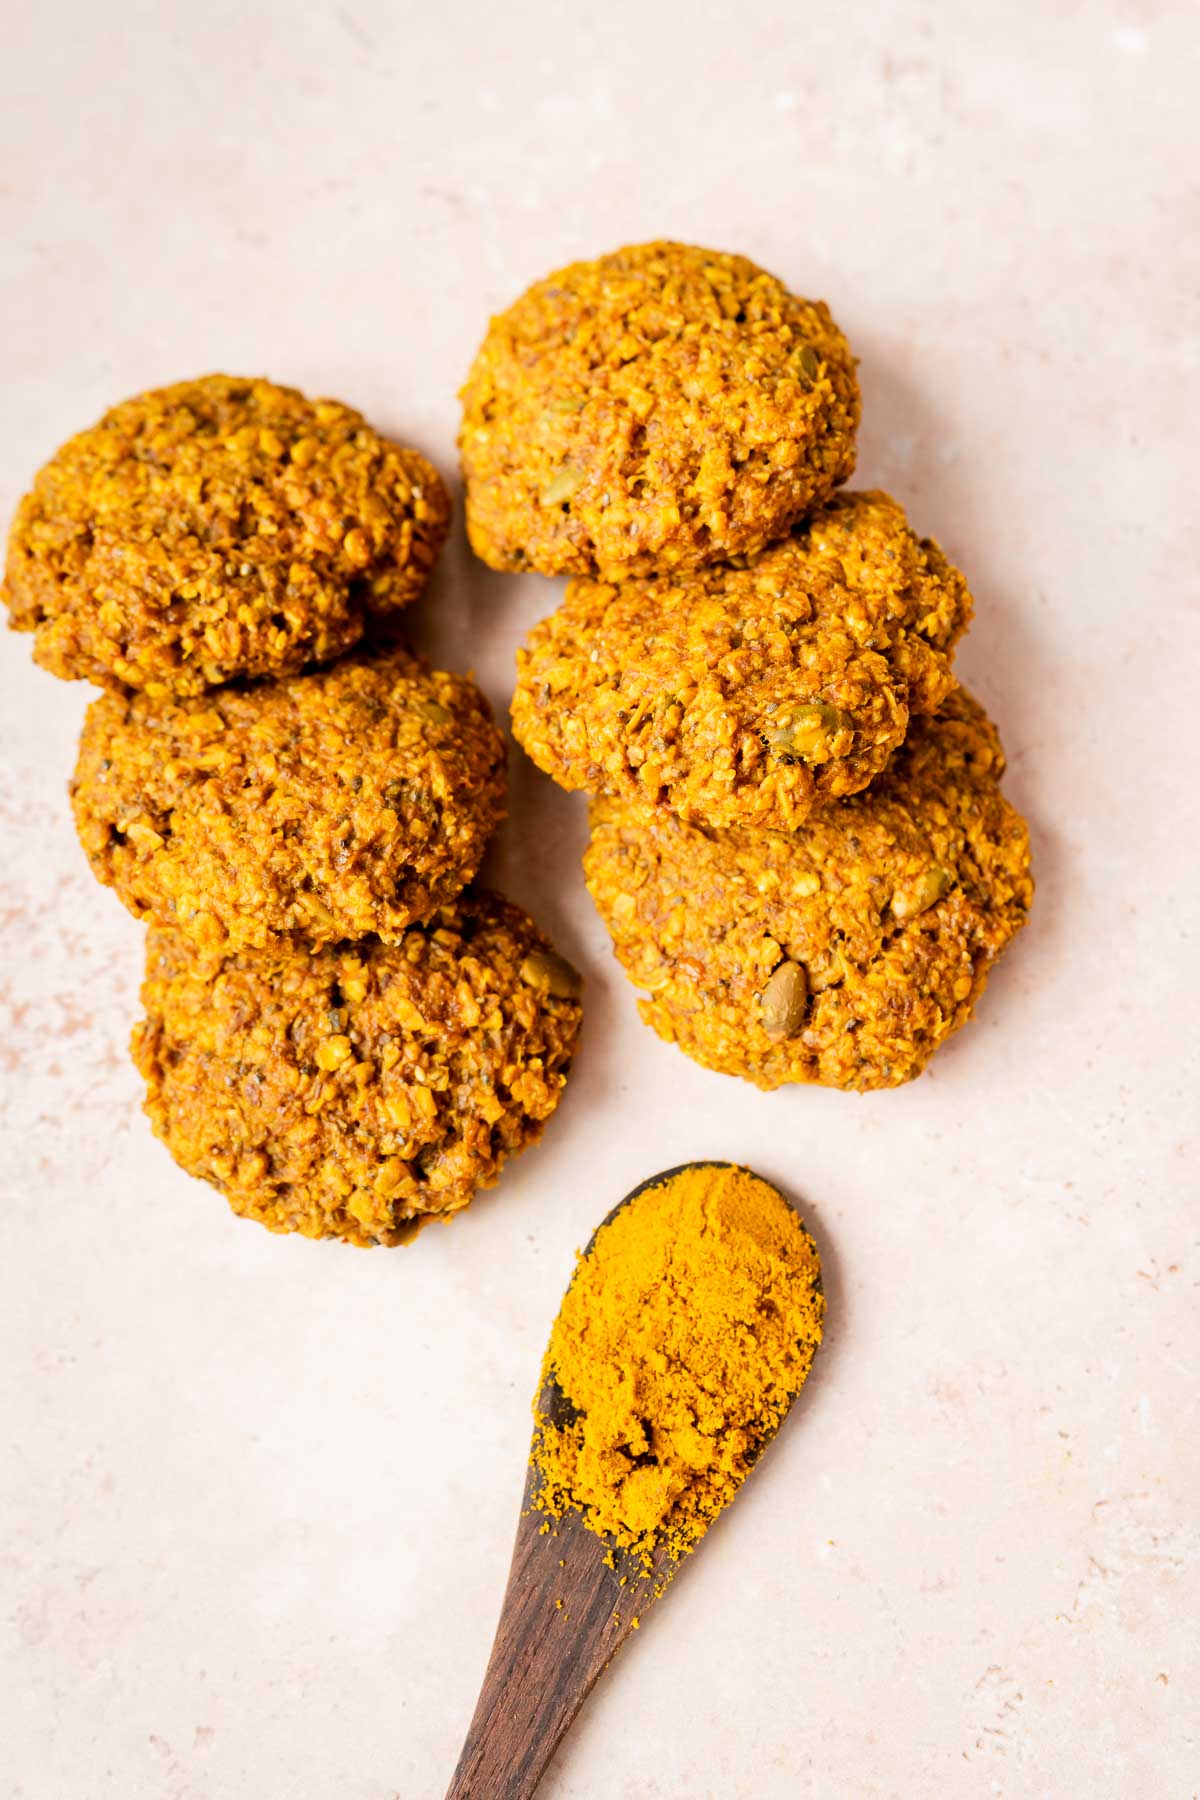 Golden milk breakfast recipe featuring turmeric cookies served with a spoon.